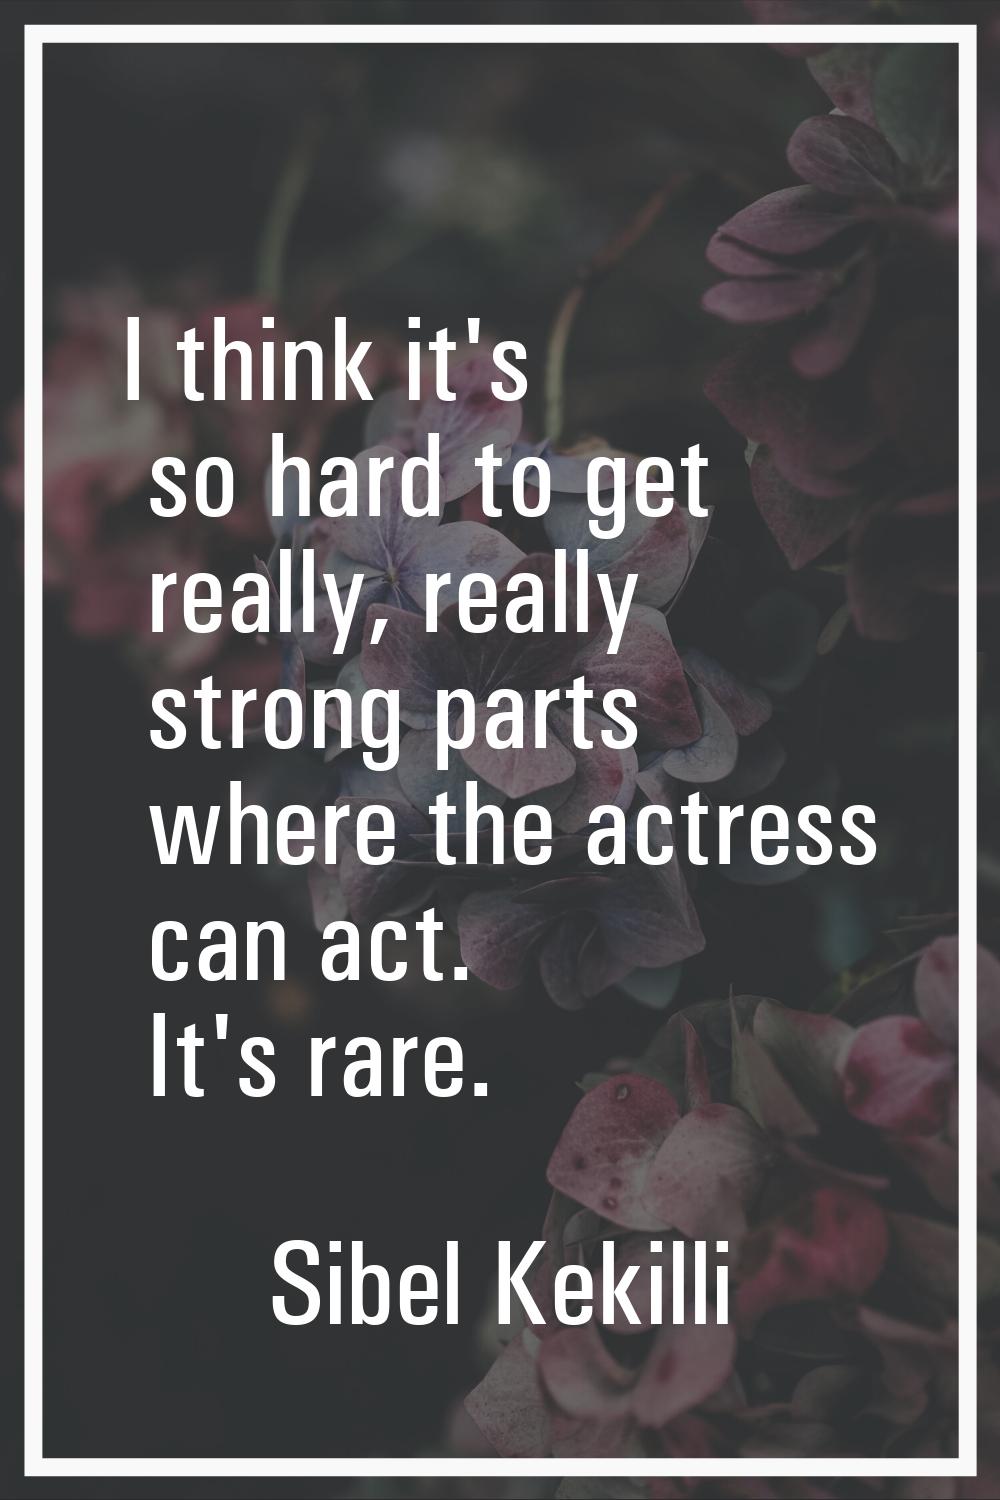 I think it's so hard to get really, really strong parts where the actress can act. It's rare.